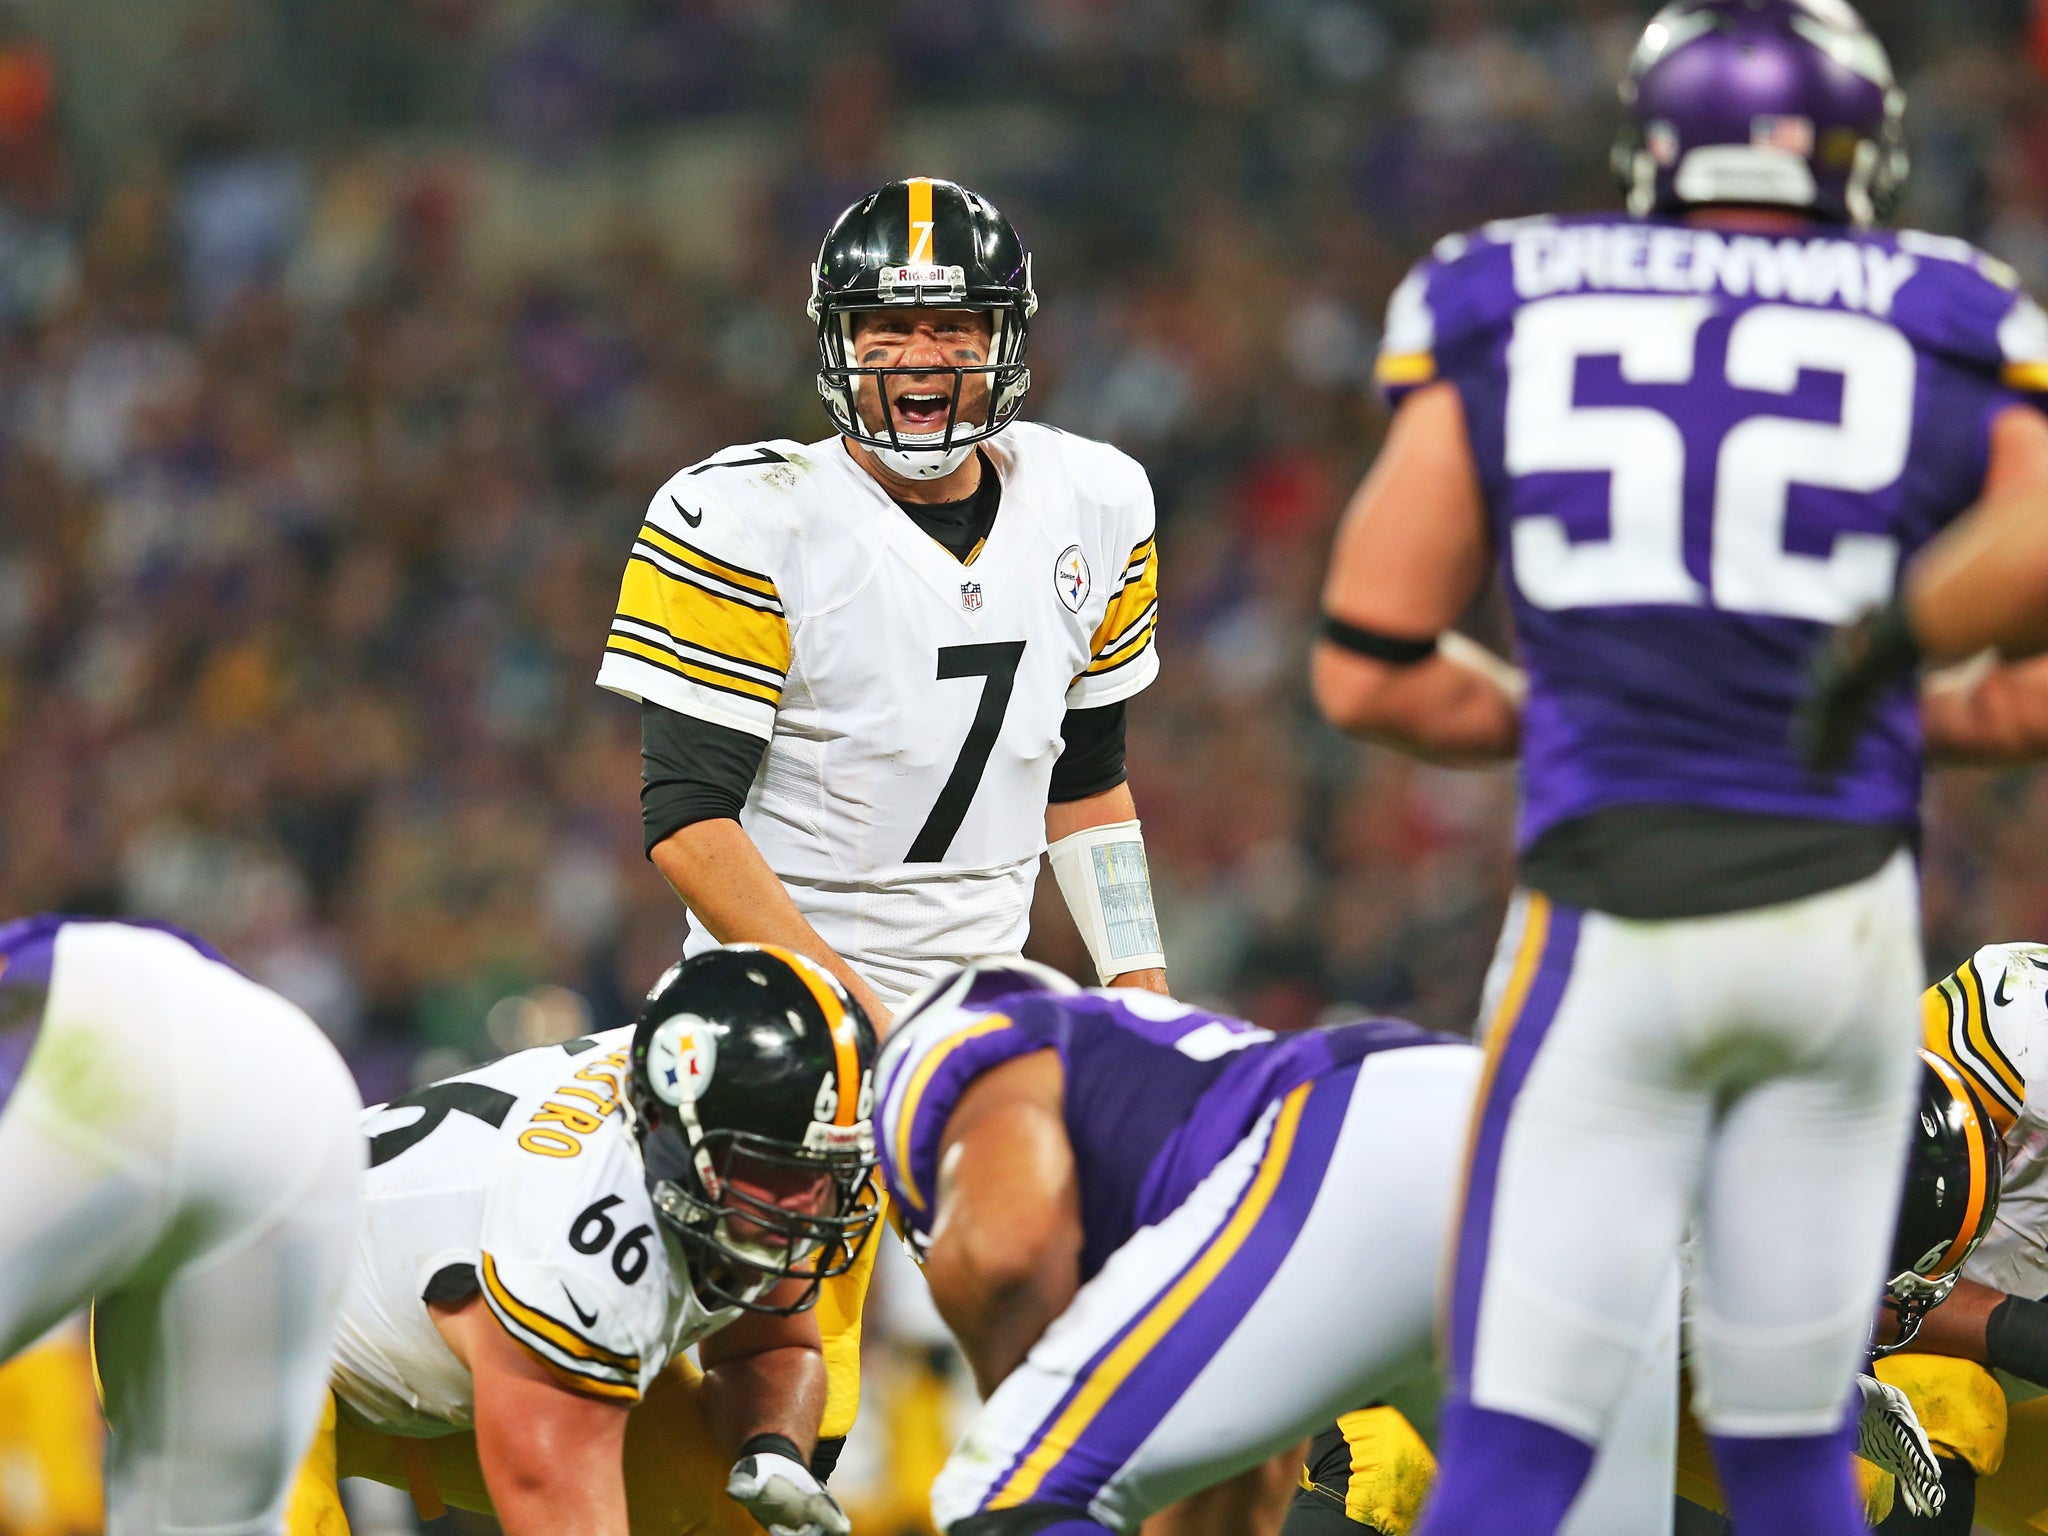 Pittsburgh Quarterback Ben Roethlisberger shouts instructions during last month's NFL International Series game between Pittsburgh Steelers and Minnesota Vikings